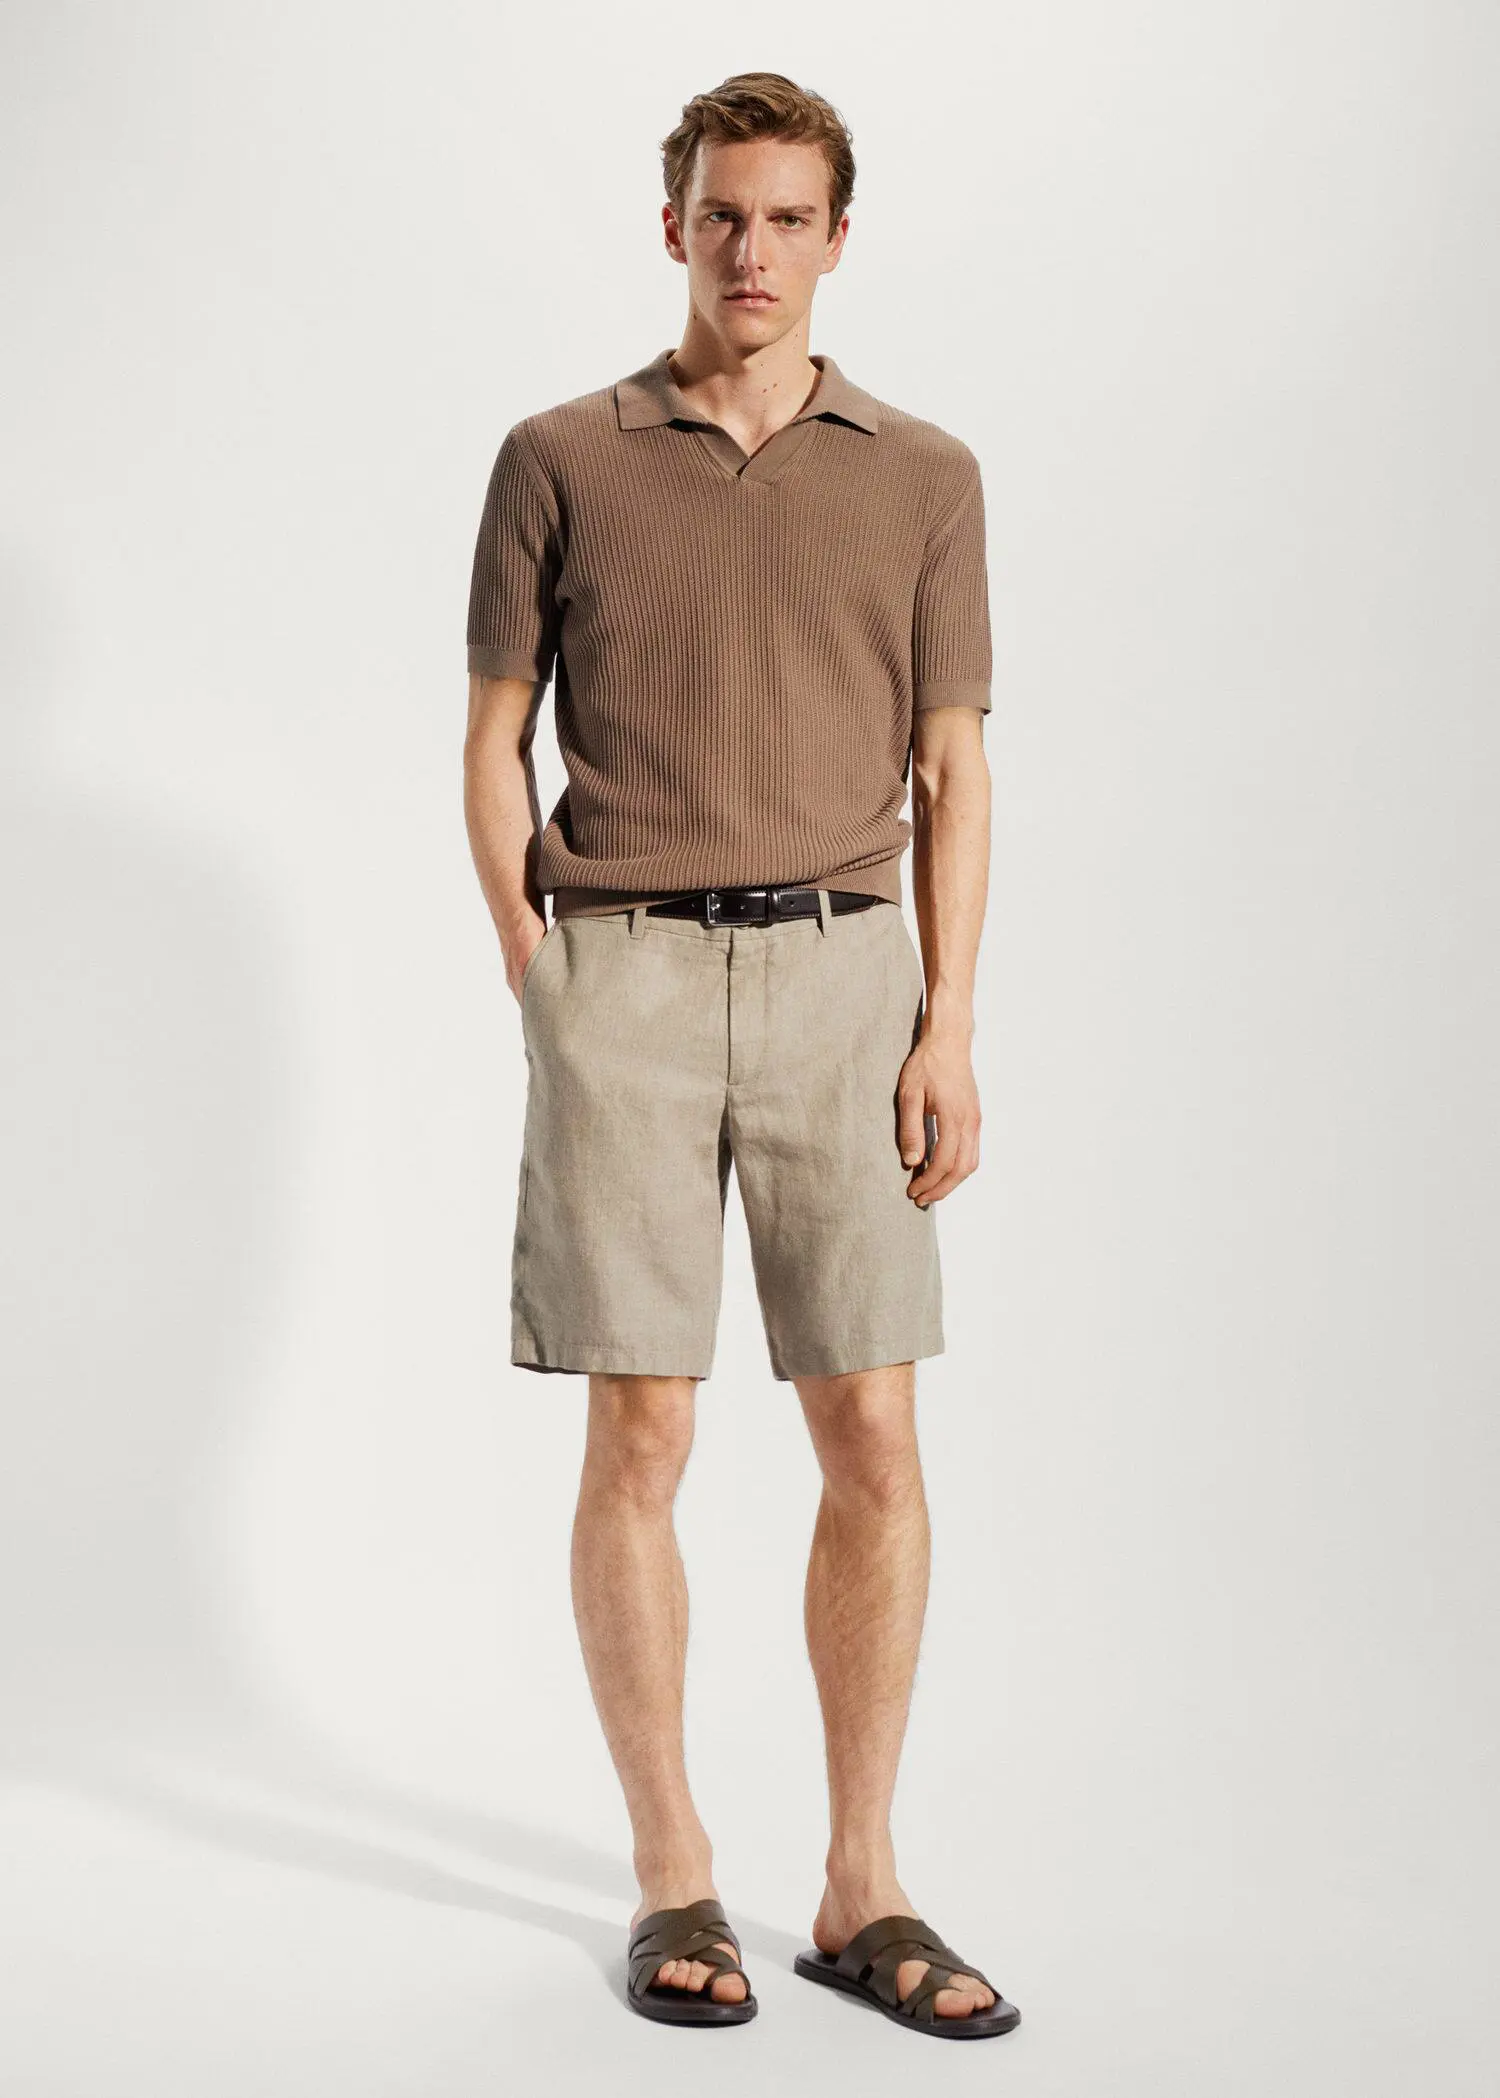 Mango 100% linen shorts. a man in a brown polo shirt and beige shorts. 